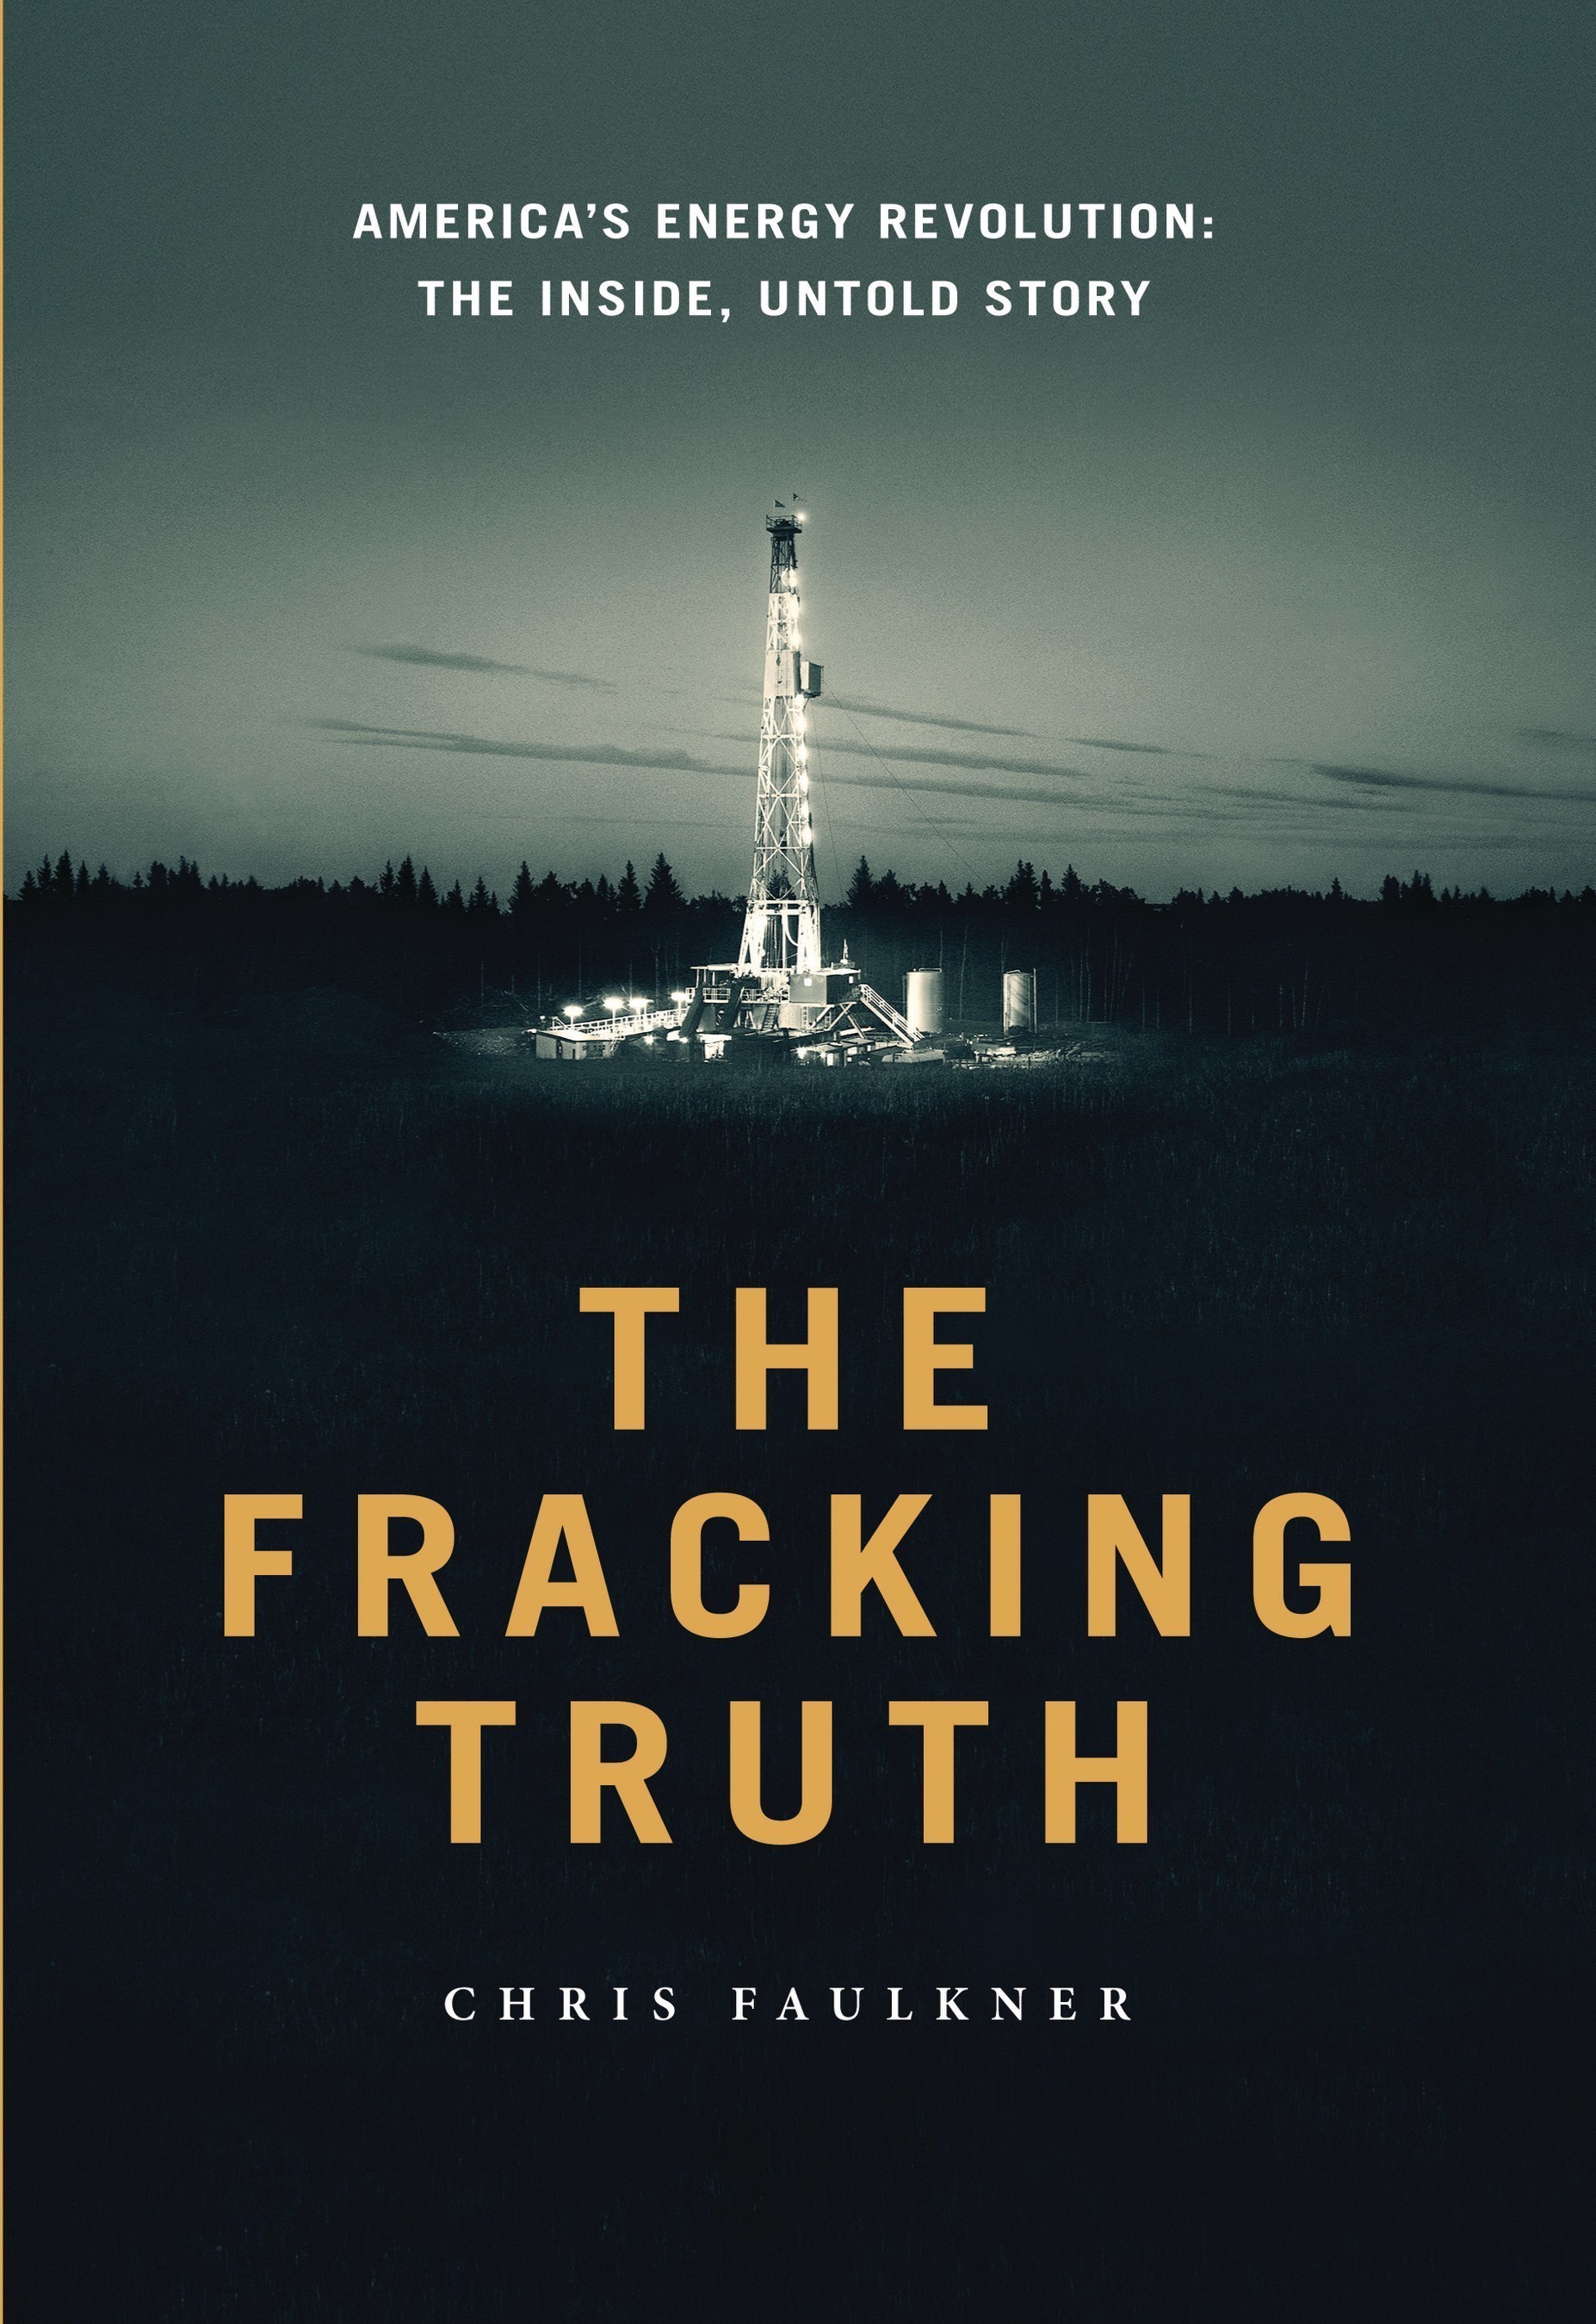 "The Fracking Truth" by Chris Faulkner available at Amazon.com and other retailers.